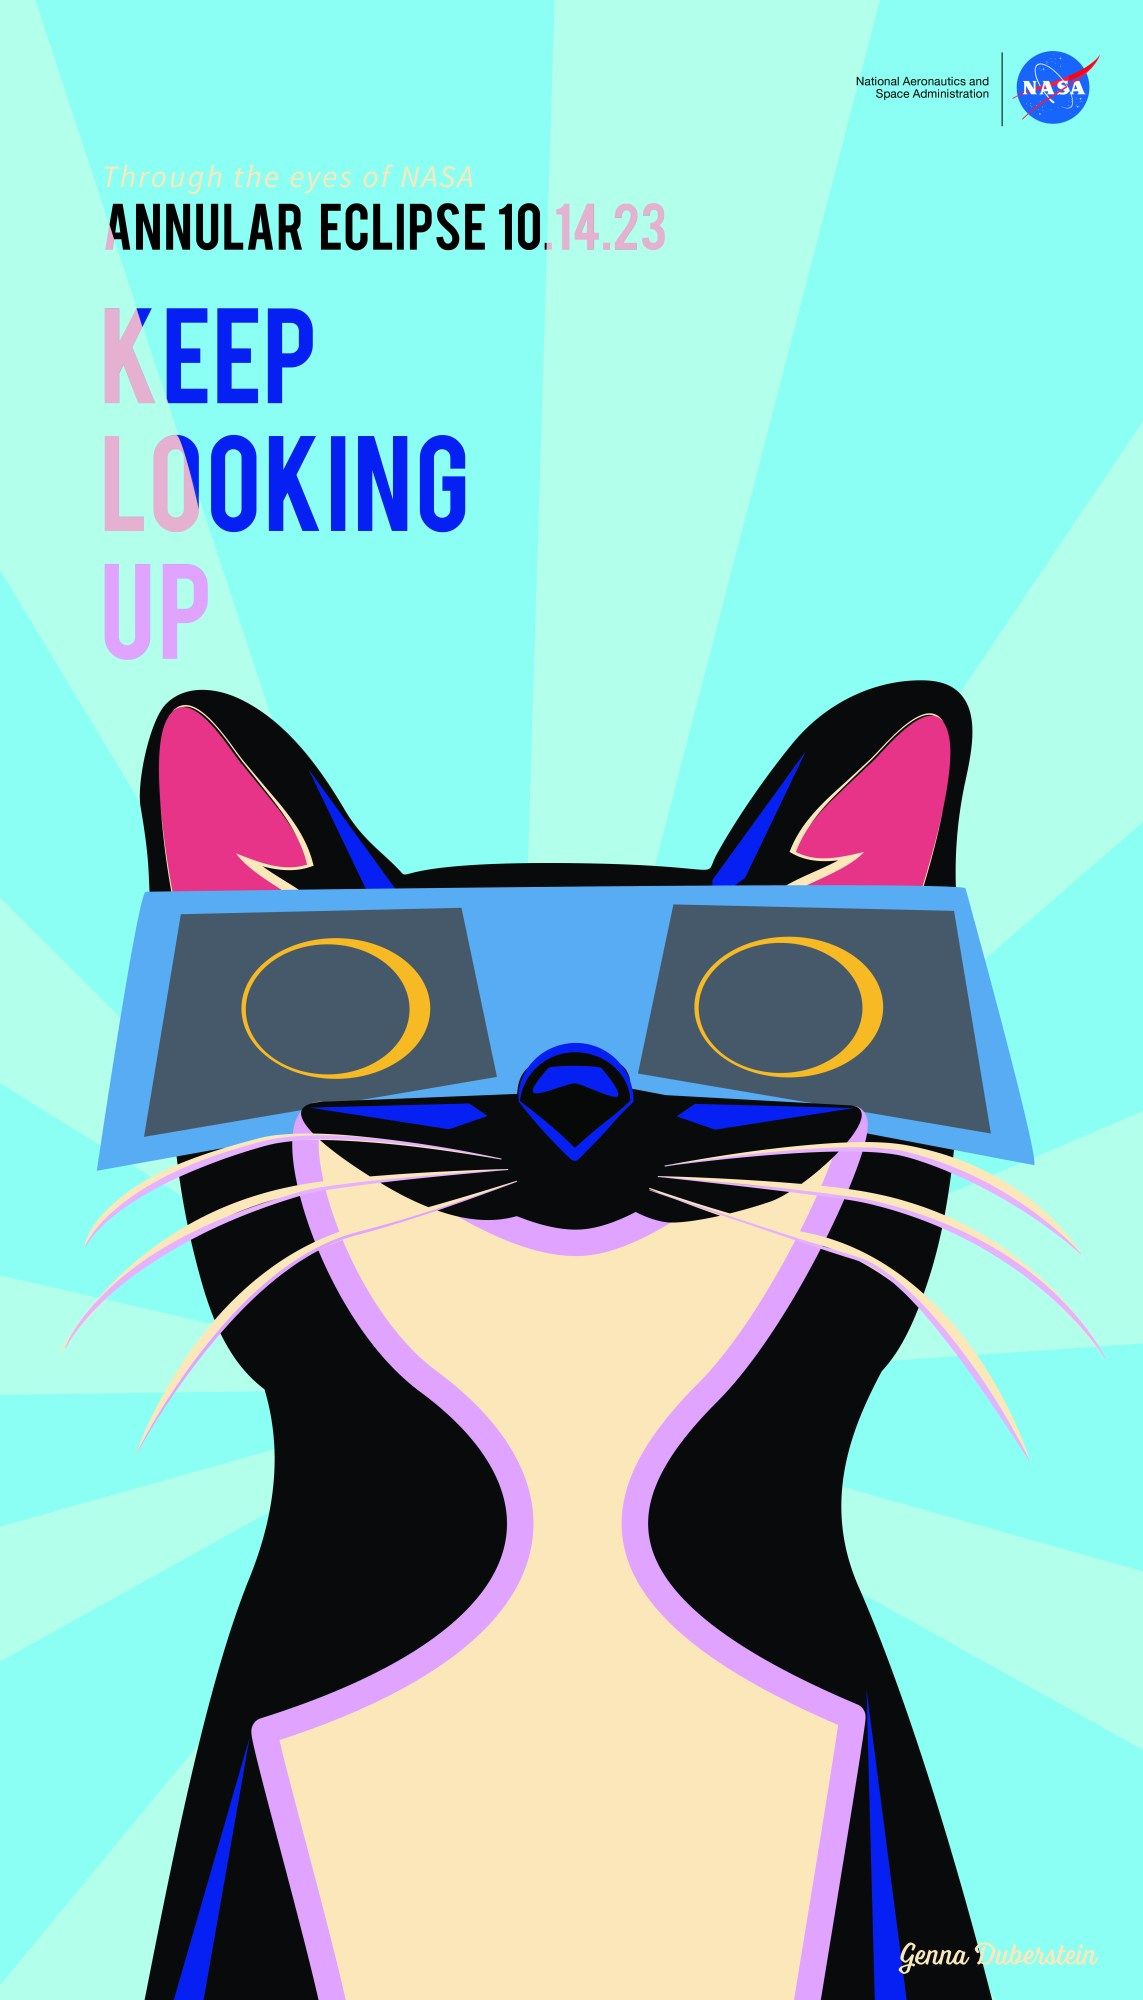 Against a background of two shades of light blue, a cat is shown from the chest up. The cat is black and white with pink on its ears. The cat is wearing eclipse glasses, with an annular solar eclipse reflected in them. The poster says Through the eyes of NASA. Annular Eclipse 10.14.23. Keep Looking Up.